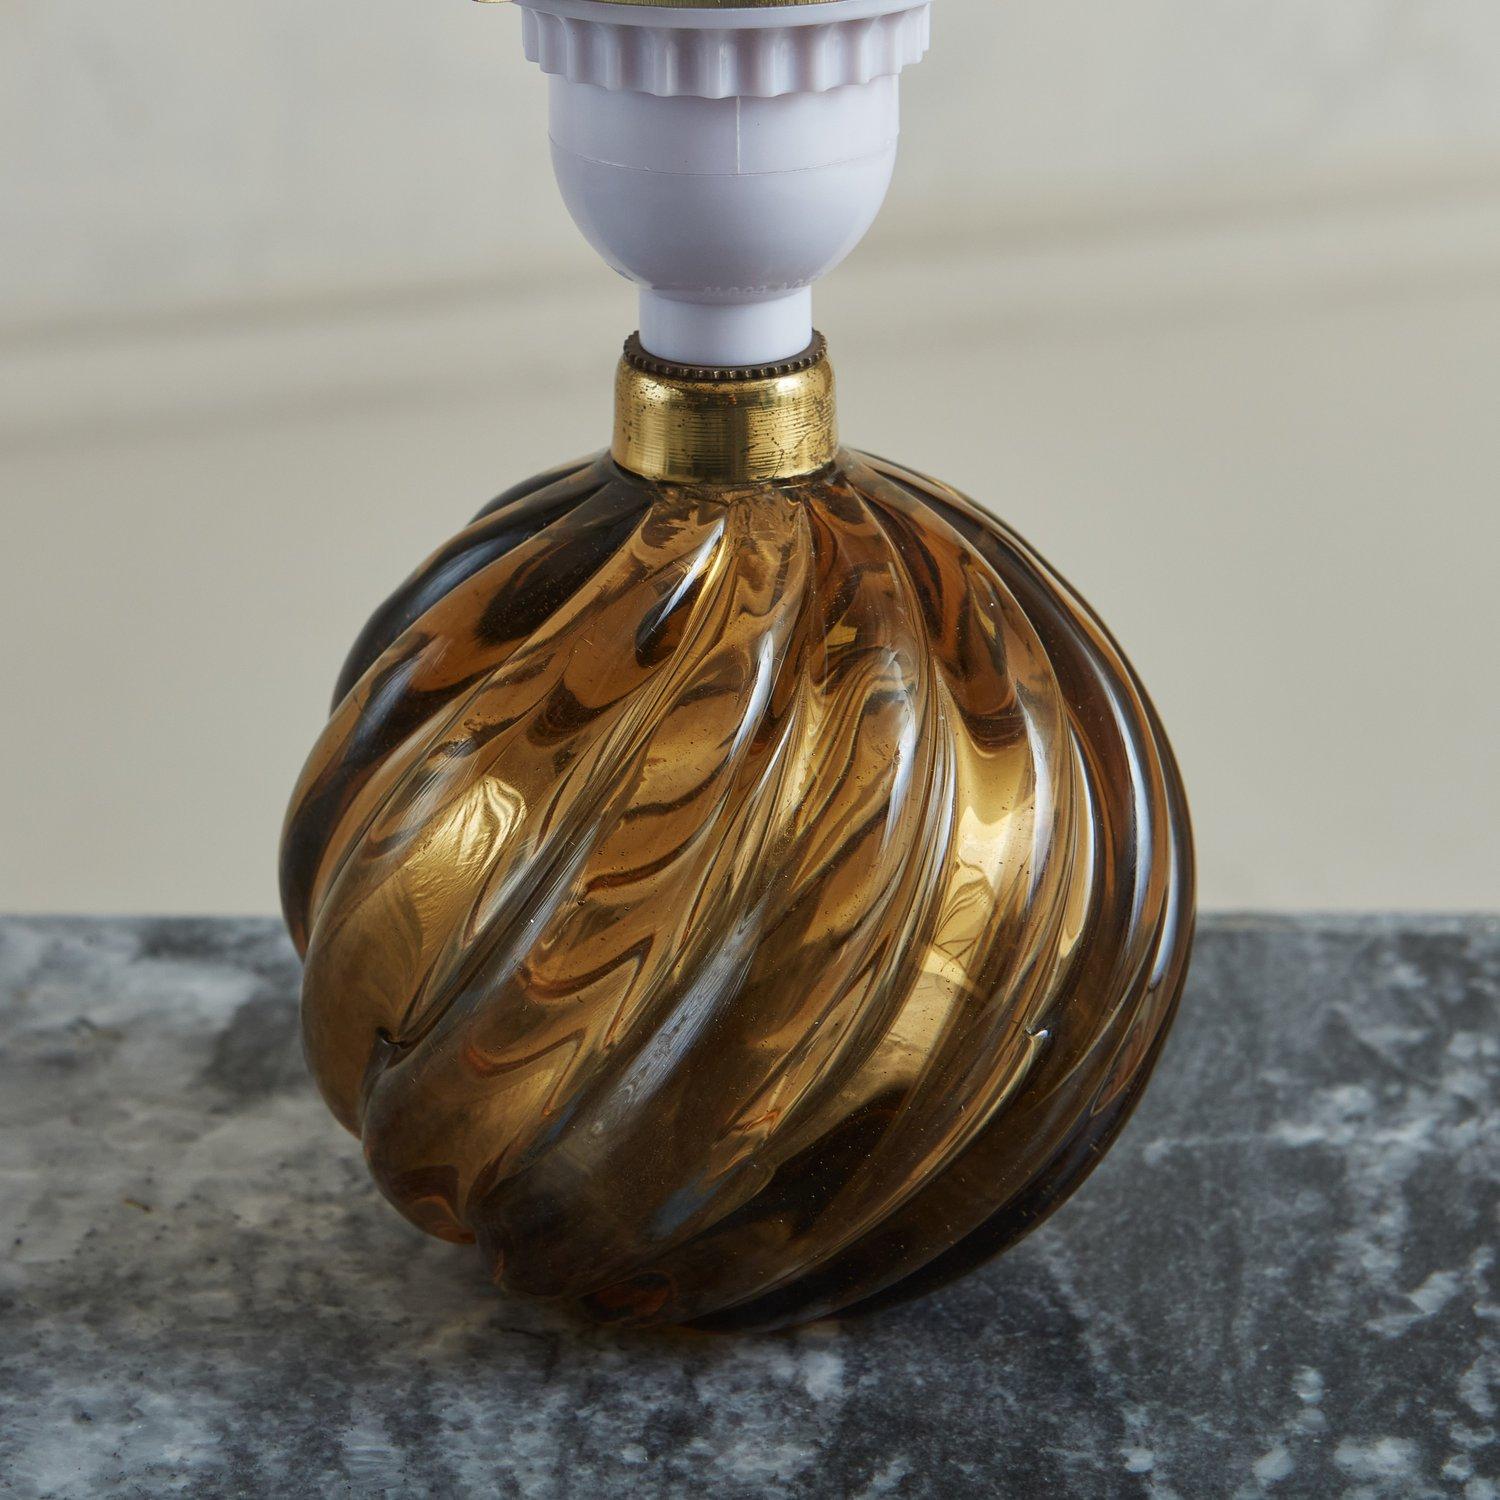 Brass Petite Amber Murano Glass Table Lamp By Paolo Venini, Italy 1930s